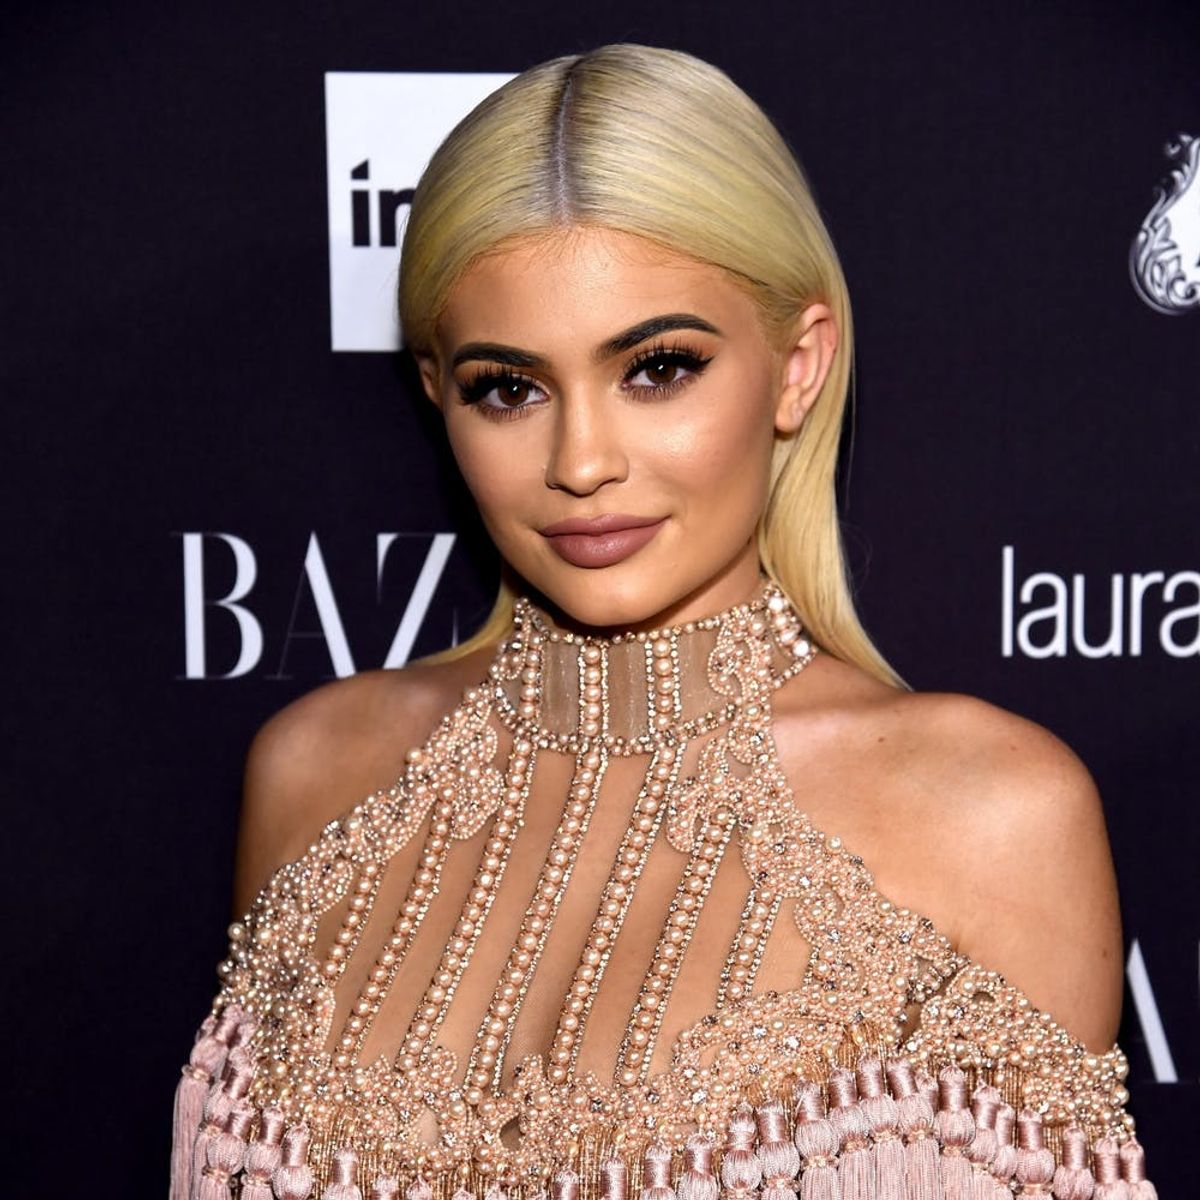 For Kylie Jenner, Thigh-High Boots Are the New Pants